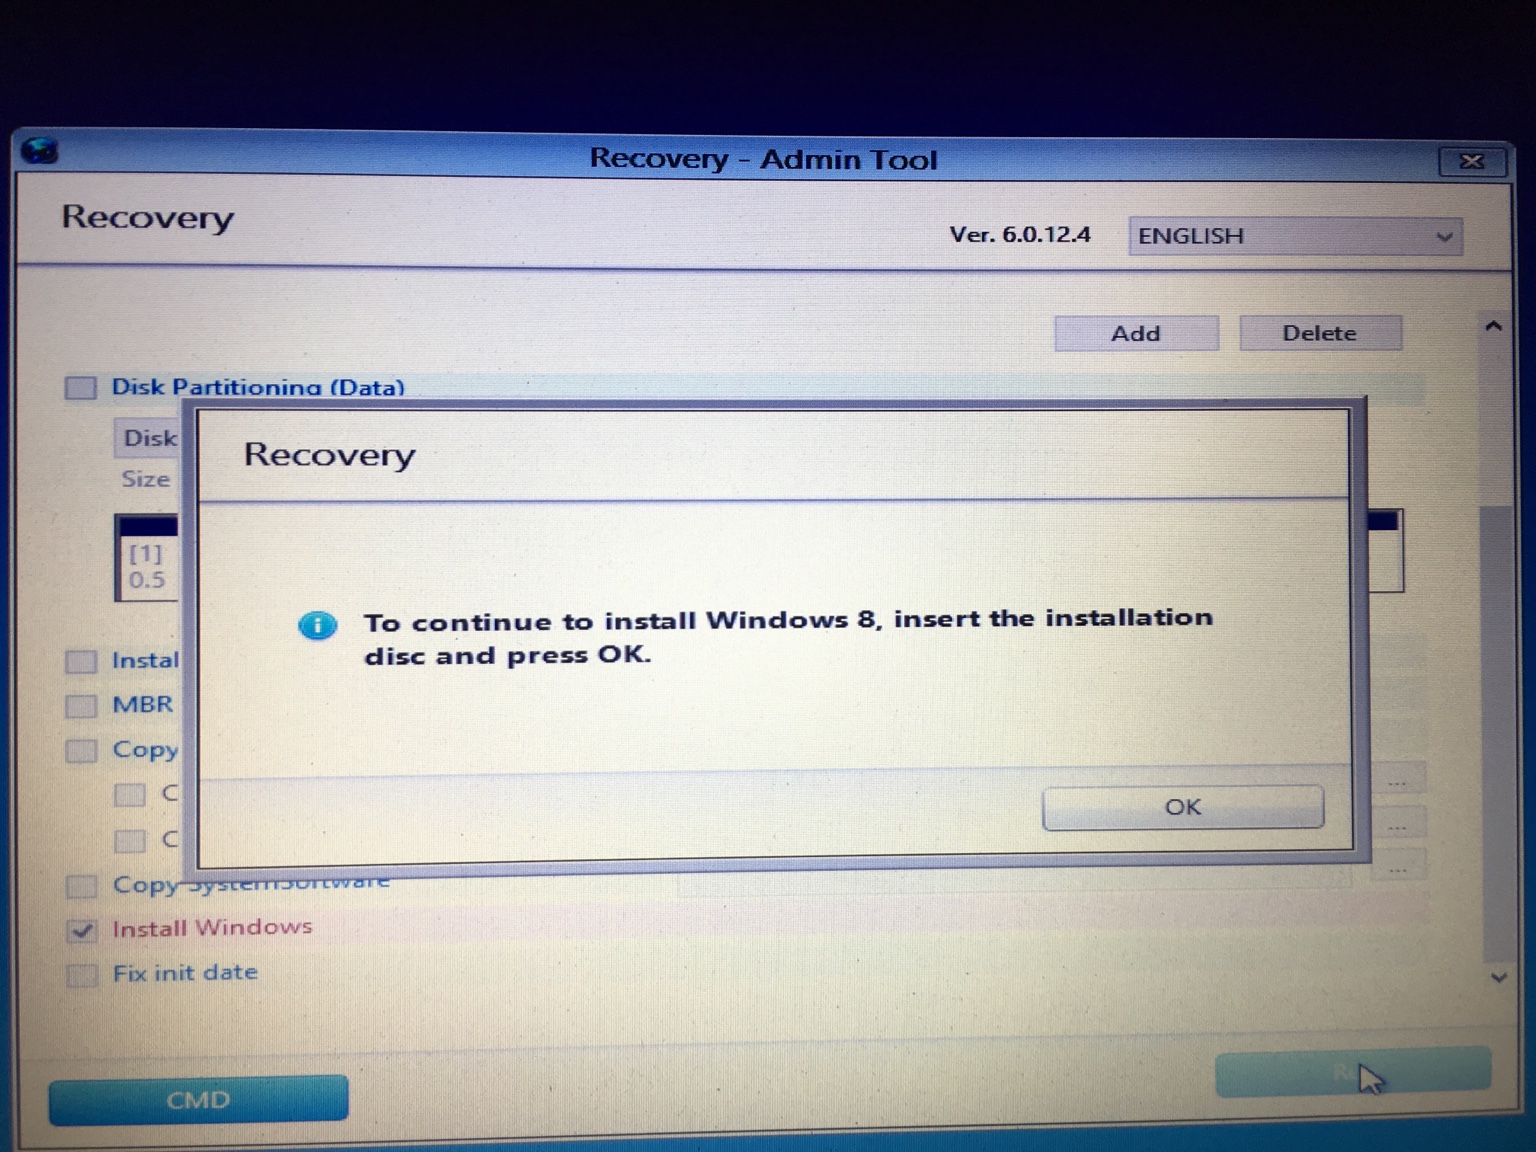 samsung recovery solution admin tool